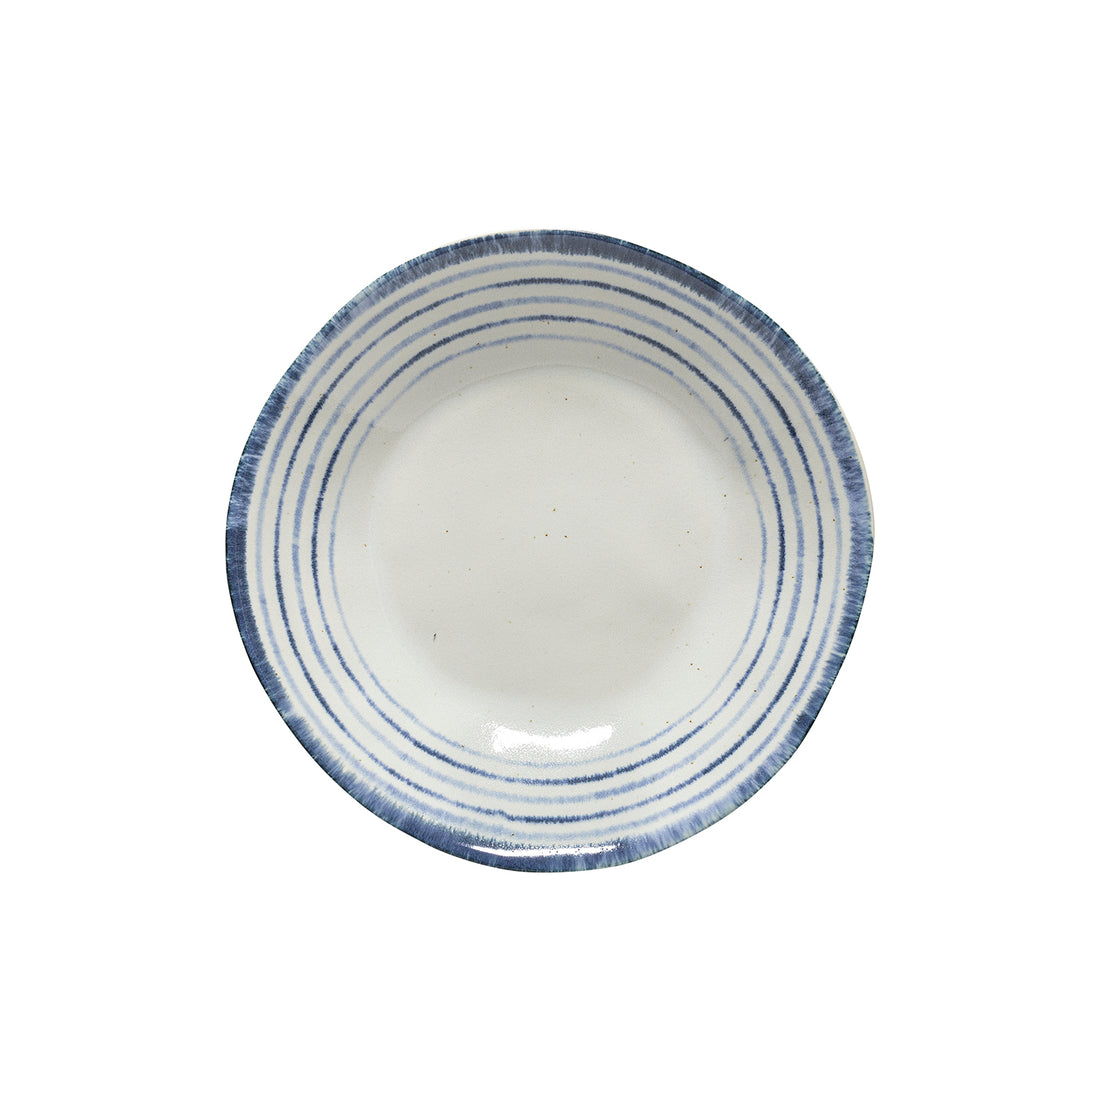 Casafina Blue and White Nantucket Pasta Plate